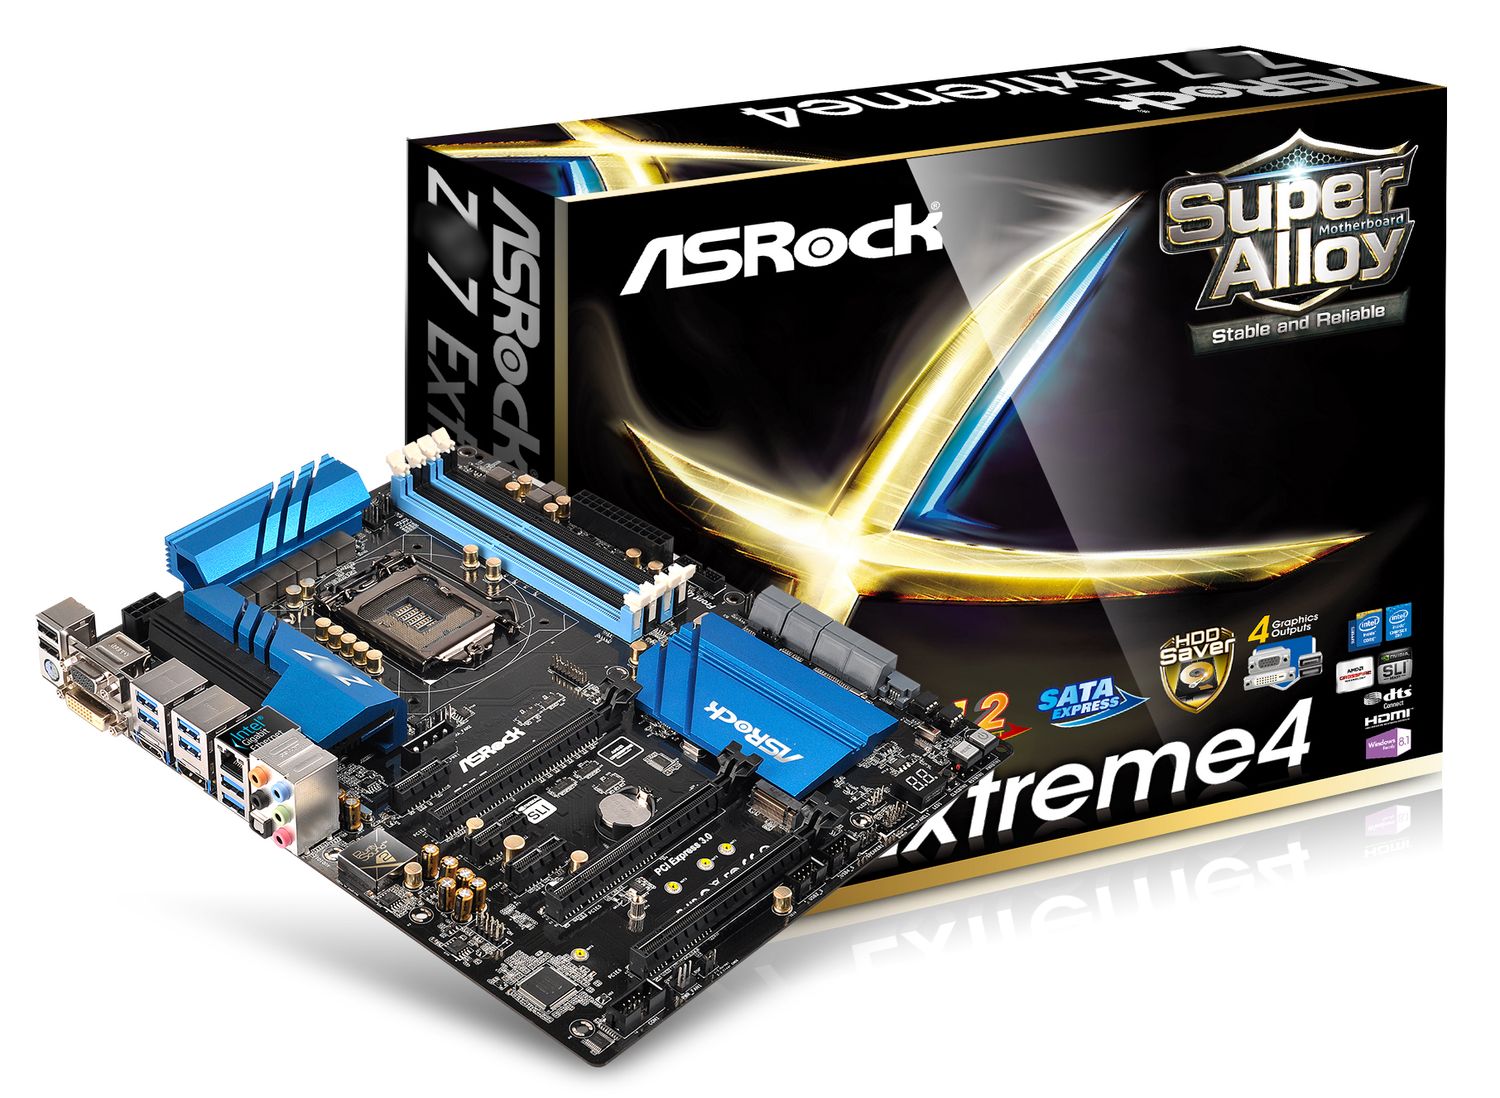 bulge Stare let's do it ASRock's New Products - Upcoming Intel Based Motherboards from GIGABYTE,  ASUS, MSI and ASRock